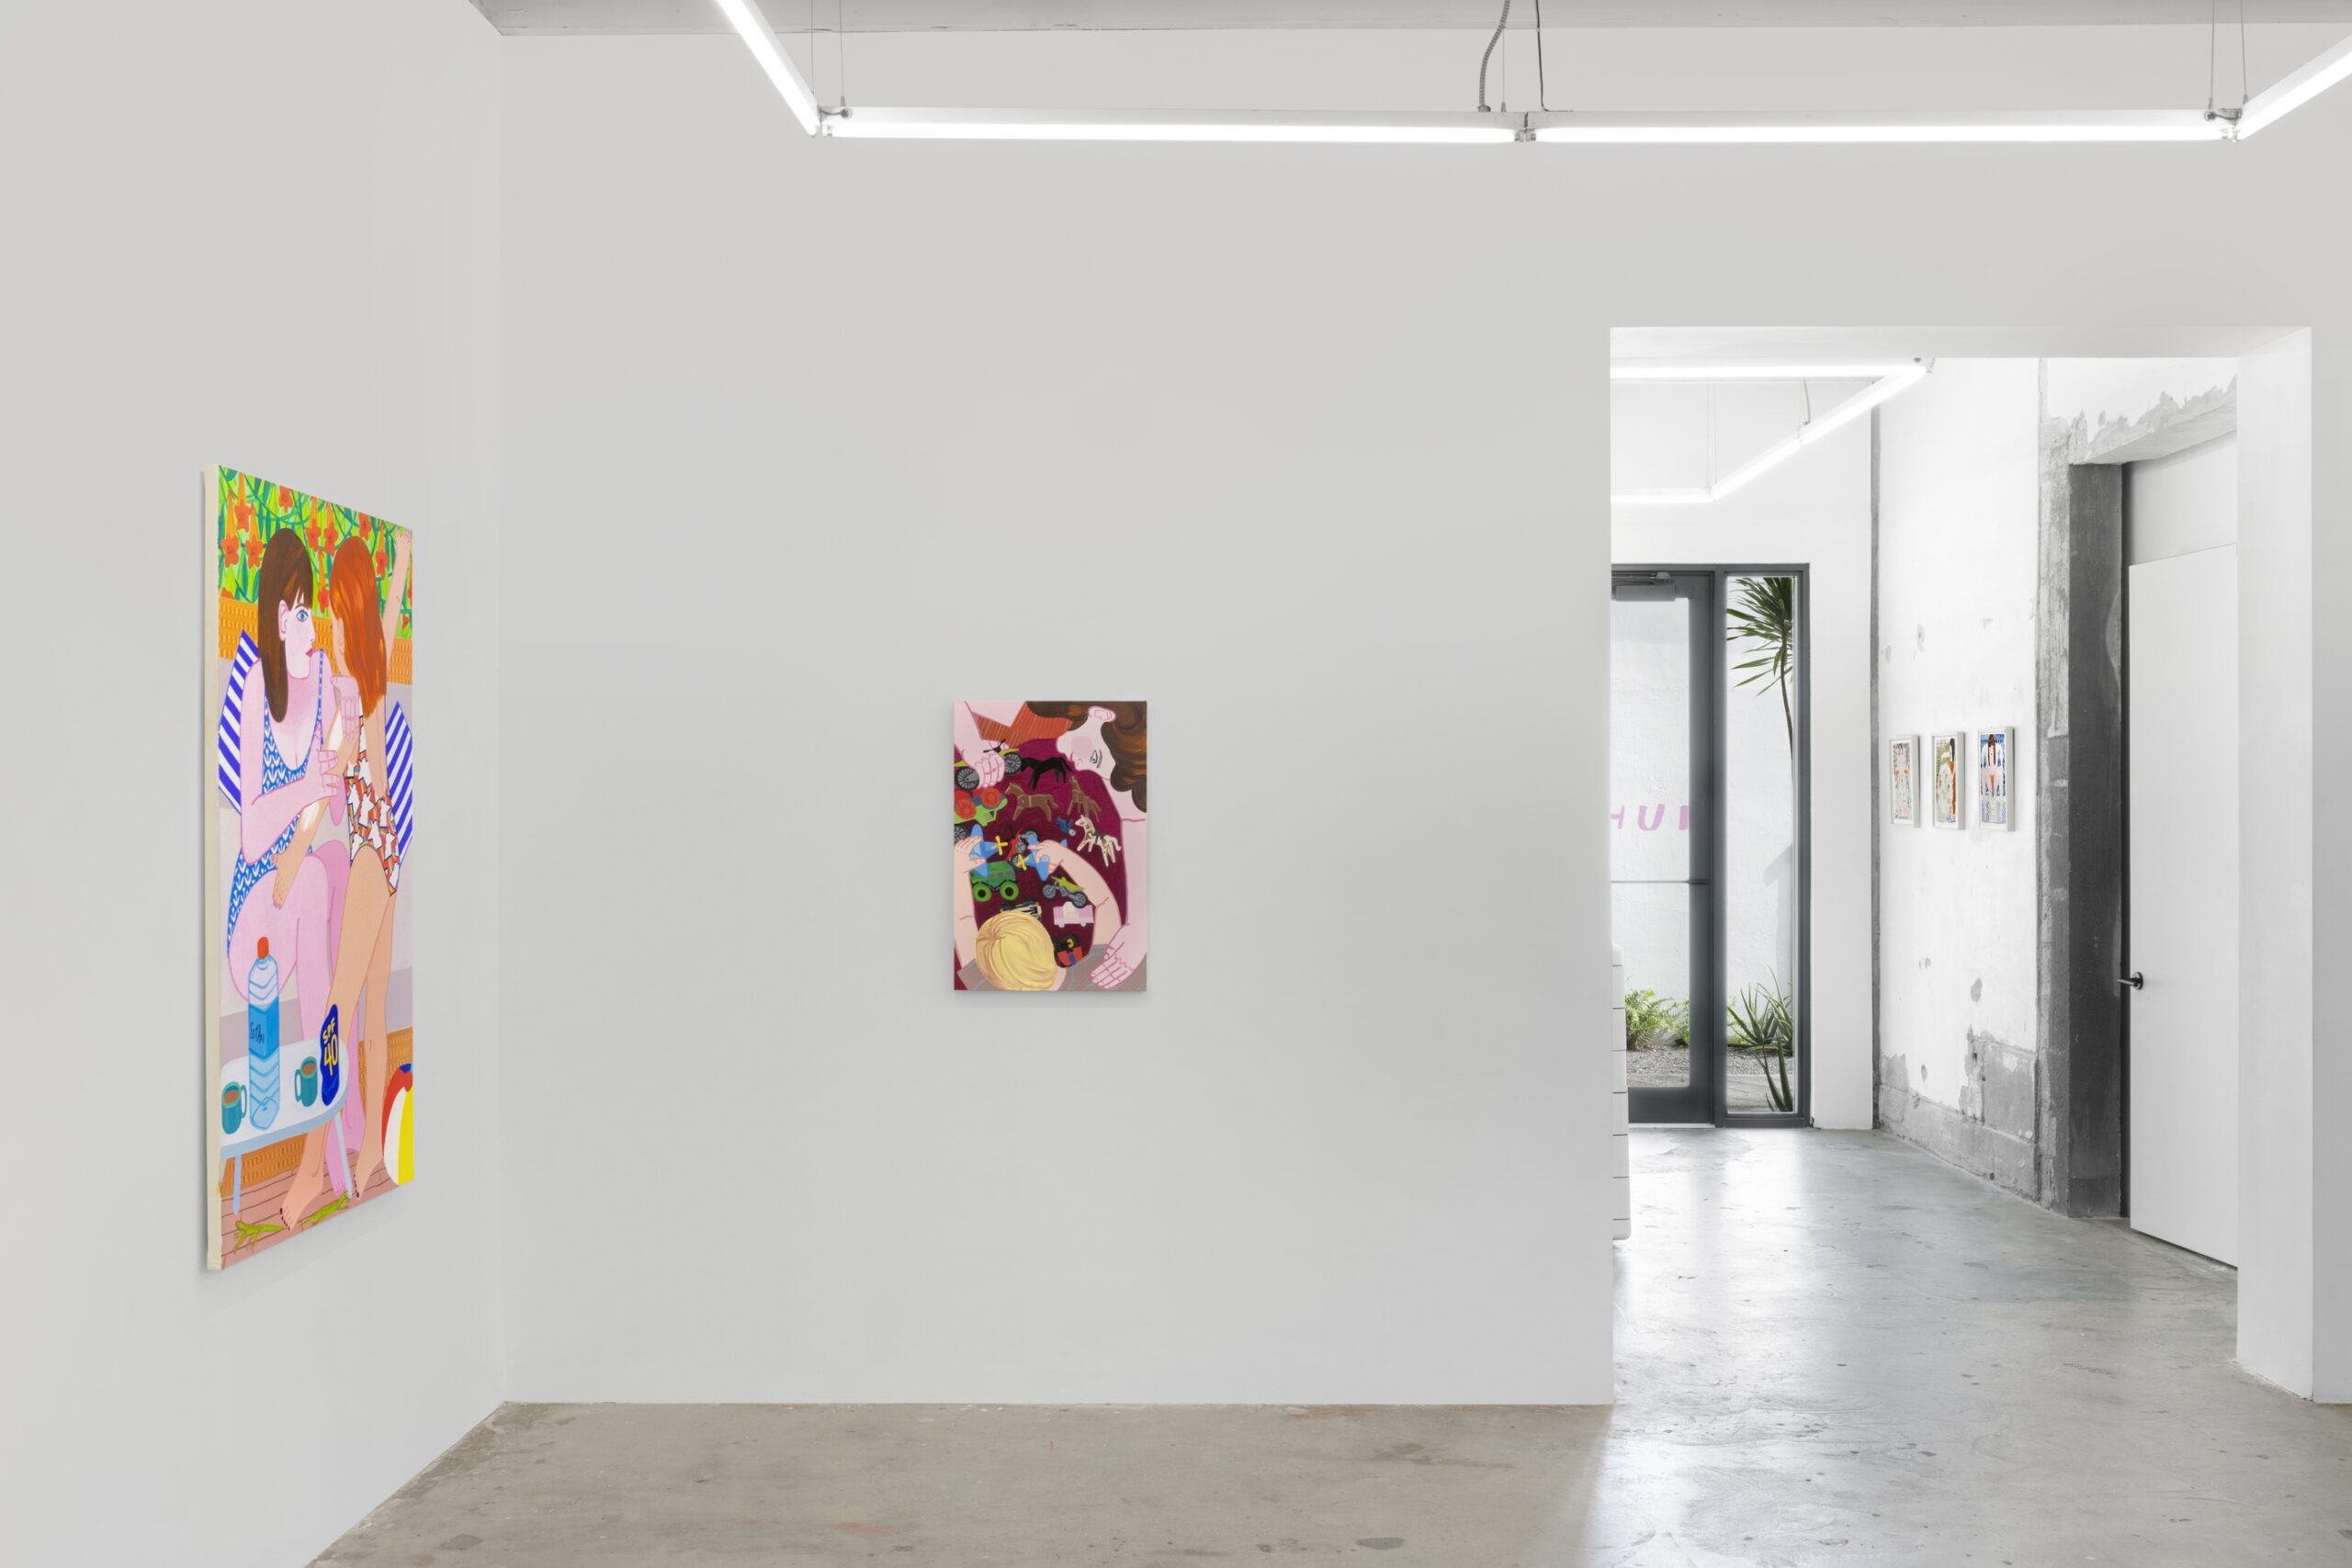 Installation view of Madeline Donahue: Present Tense on view in the Front Gallery. Photographed are oil on canvas paintings titled "Toys" and "Sunscreen."